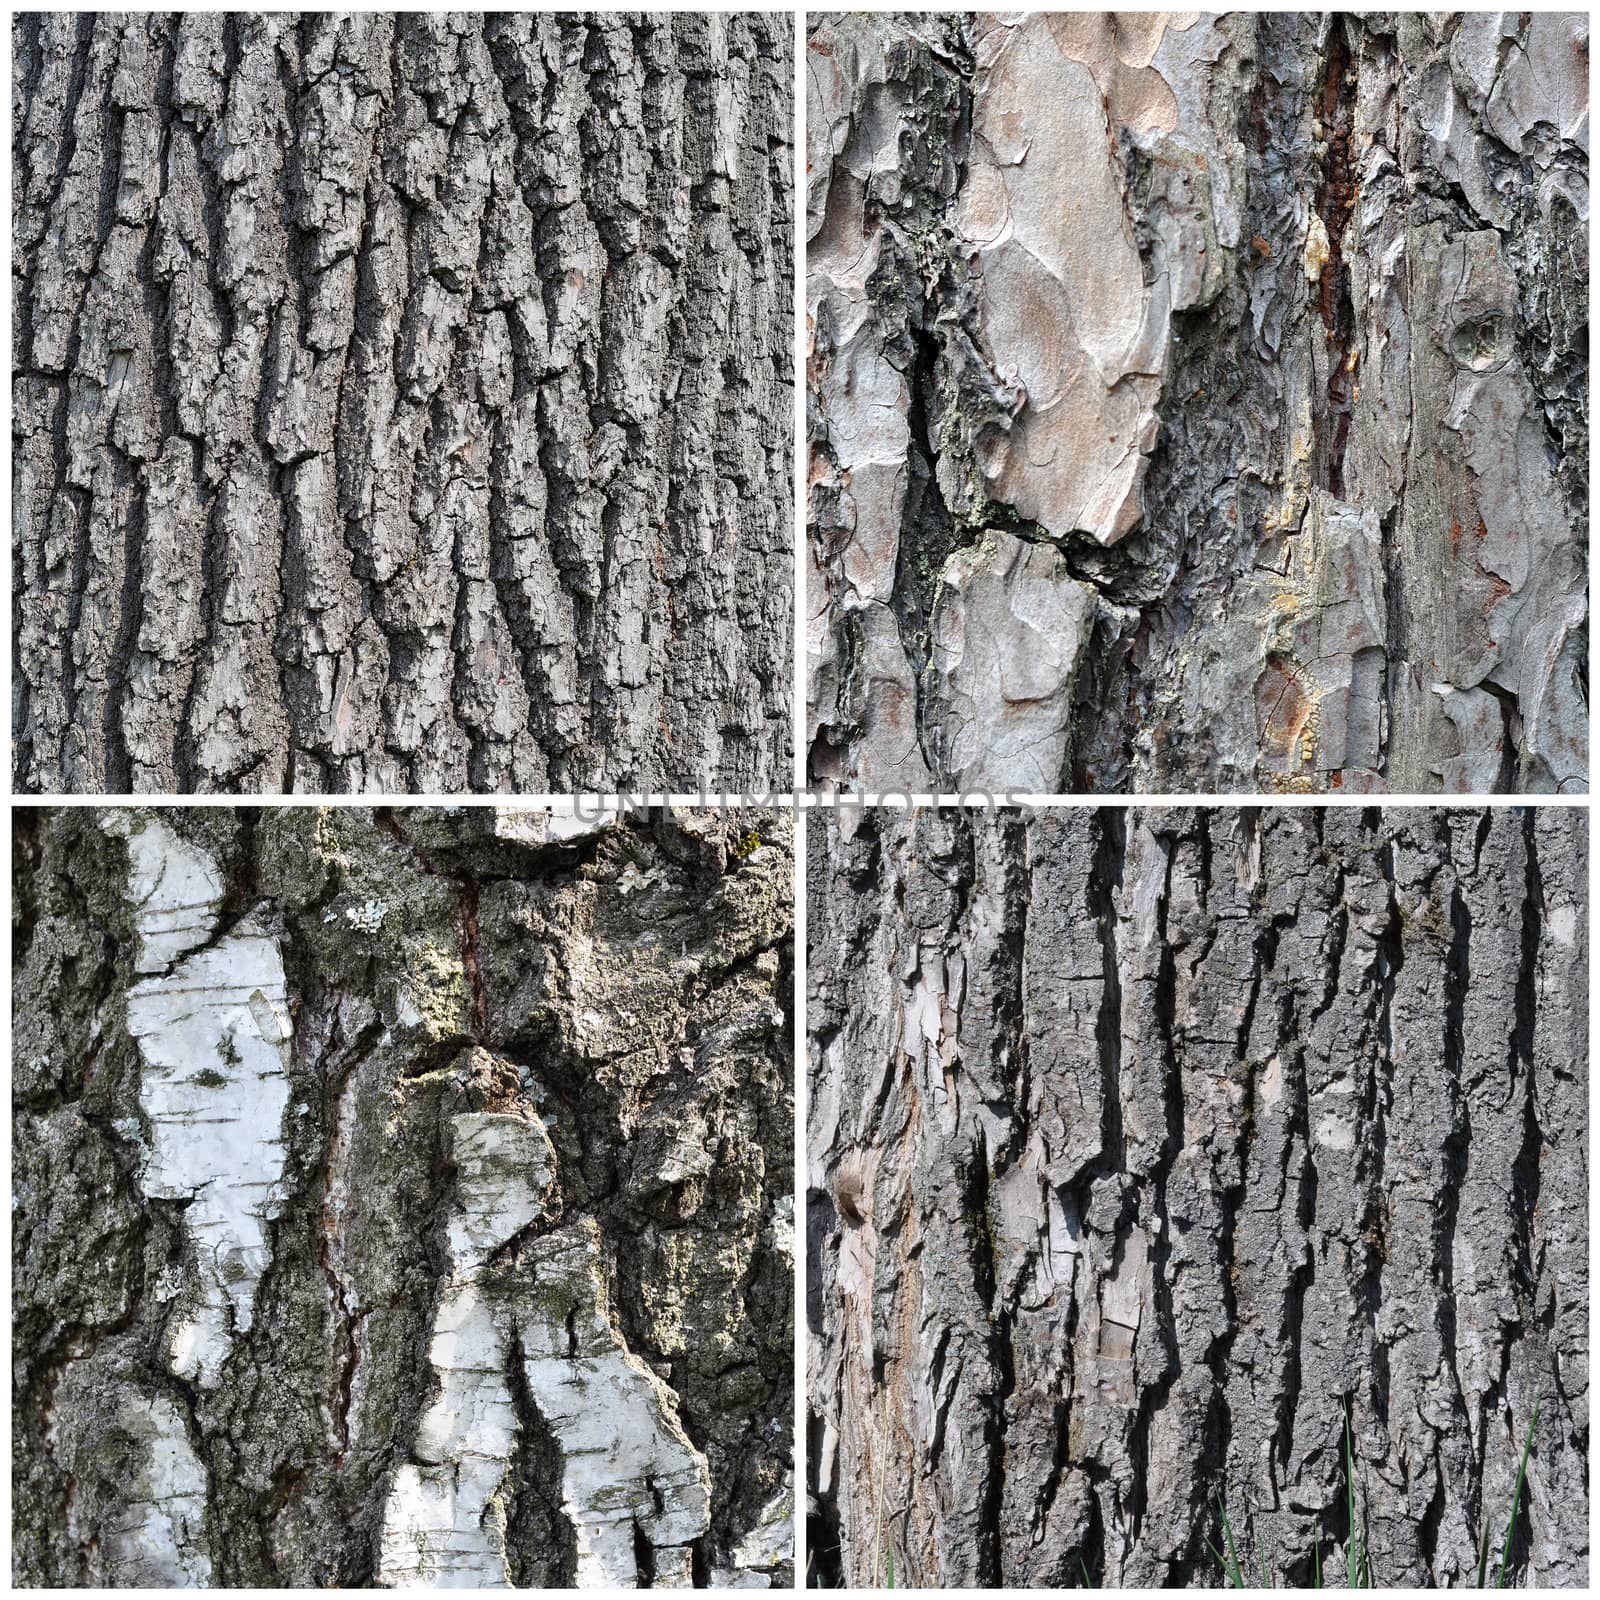 Bark of old trees, set by alexcoolok